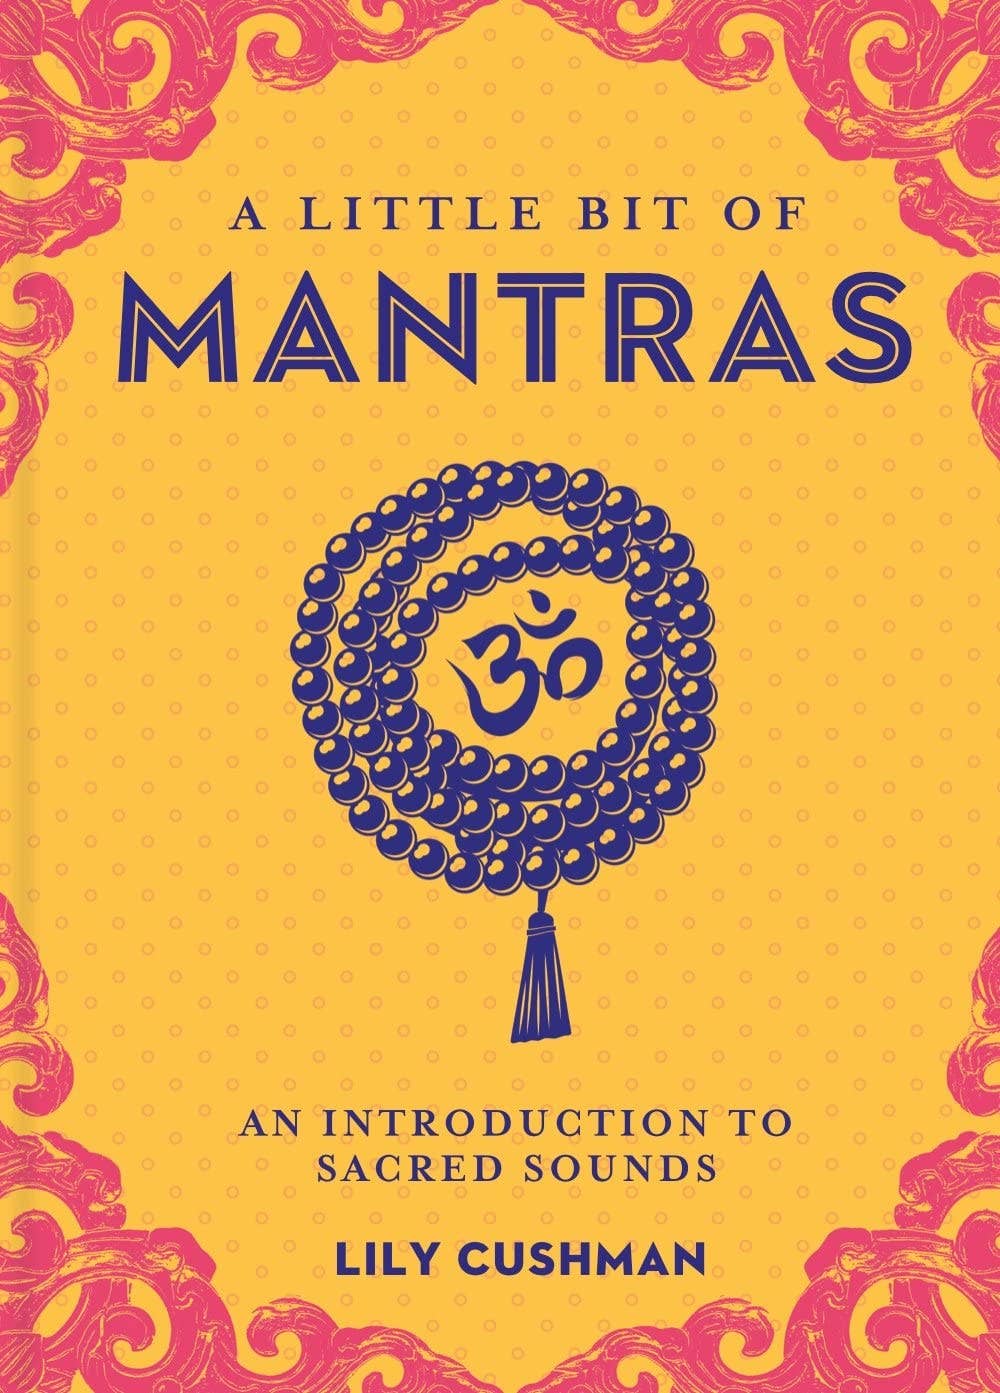 A Little Bit of Mantras by Lily Cushman - Spiral Circle